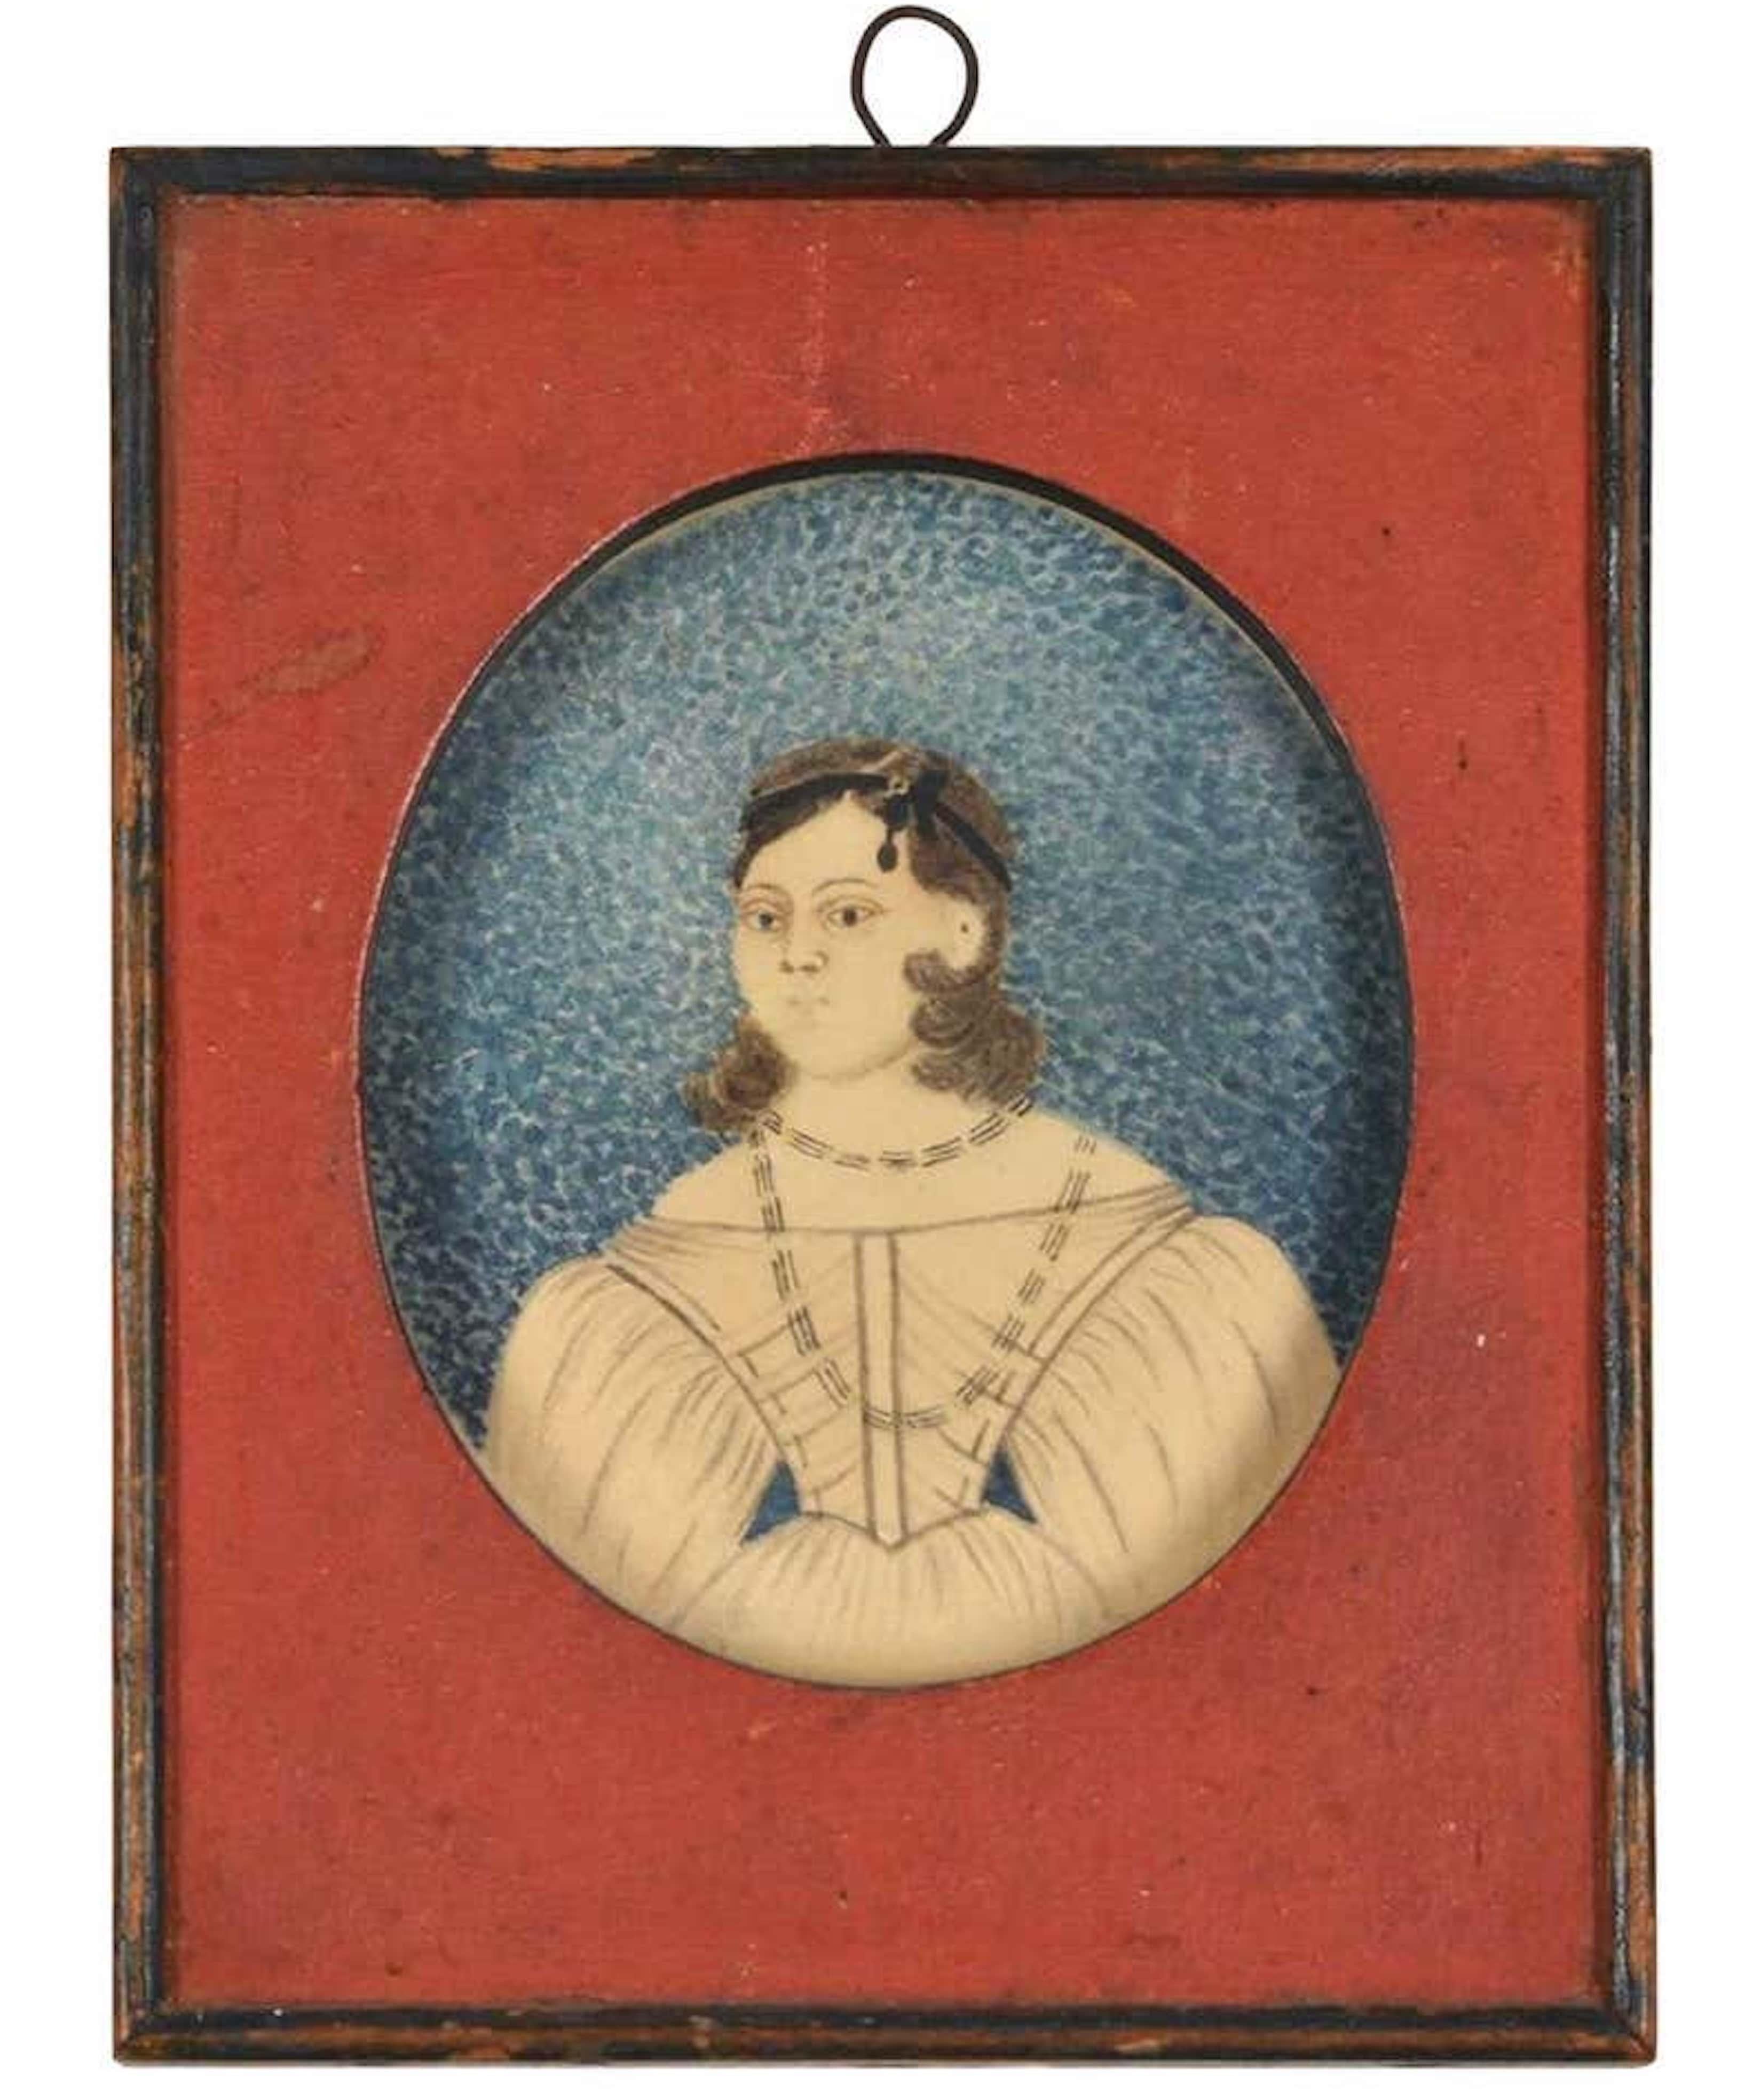 Unknown Figurative Painting - Early 19th Century American Folk Art Painting of a Young Lady